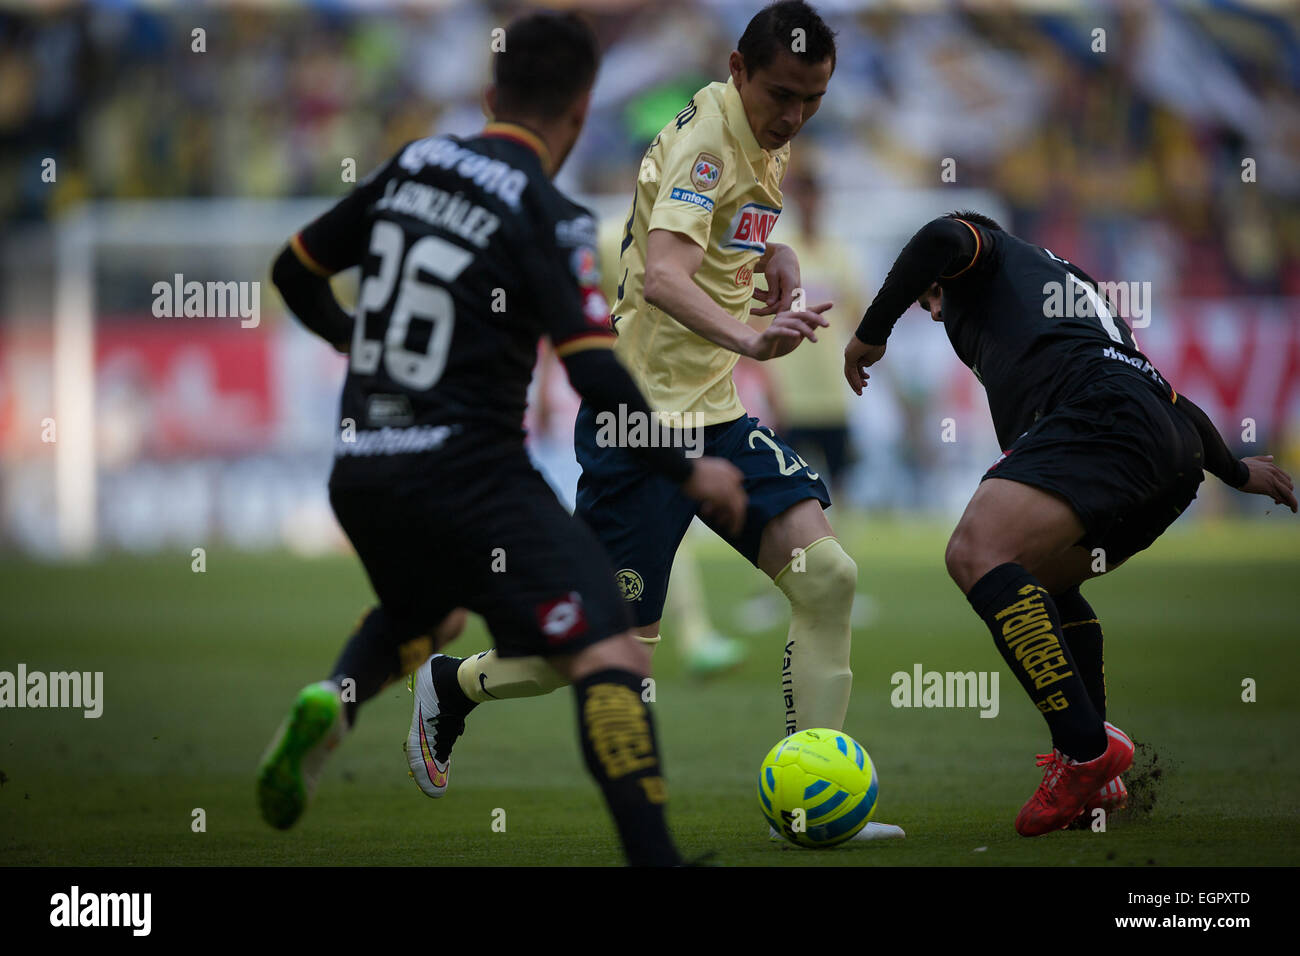 Mexico City, Mexico. 28th Feb, 2015. America's Paul Aguilar (C), vies for the ball with Leones Negros's Luis Telles (R), during the match of the 2015 Closing Tournament of MX League in the Azteca Stadium, in Mexico City, capital of Mexico, on Feb. 28, 2015. © Pedro Mera/Xinhua/Alamy Live News Stock Photo